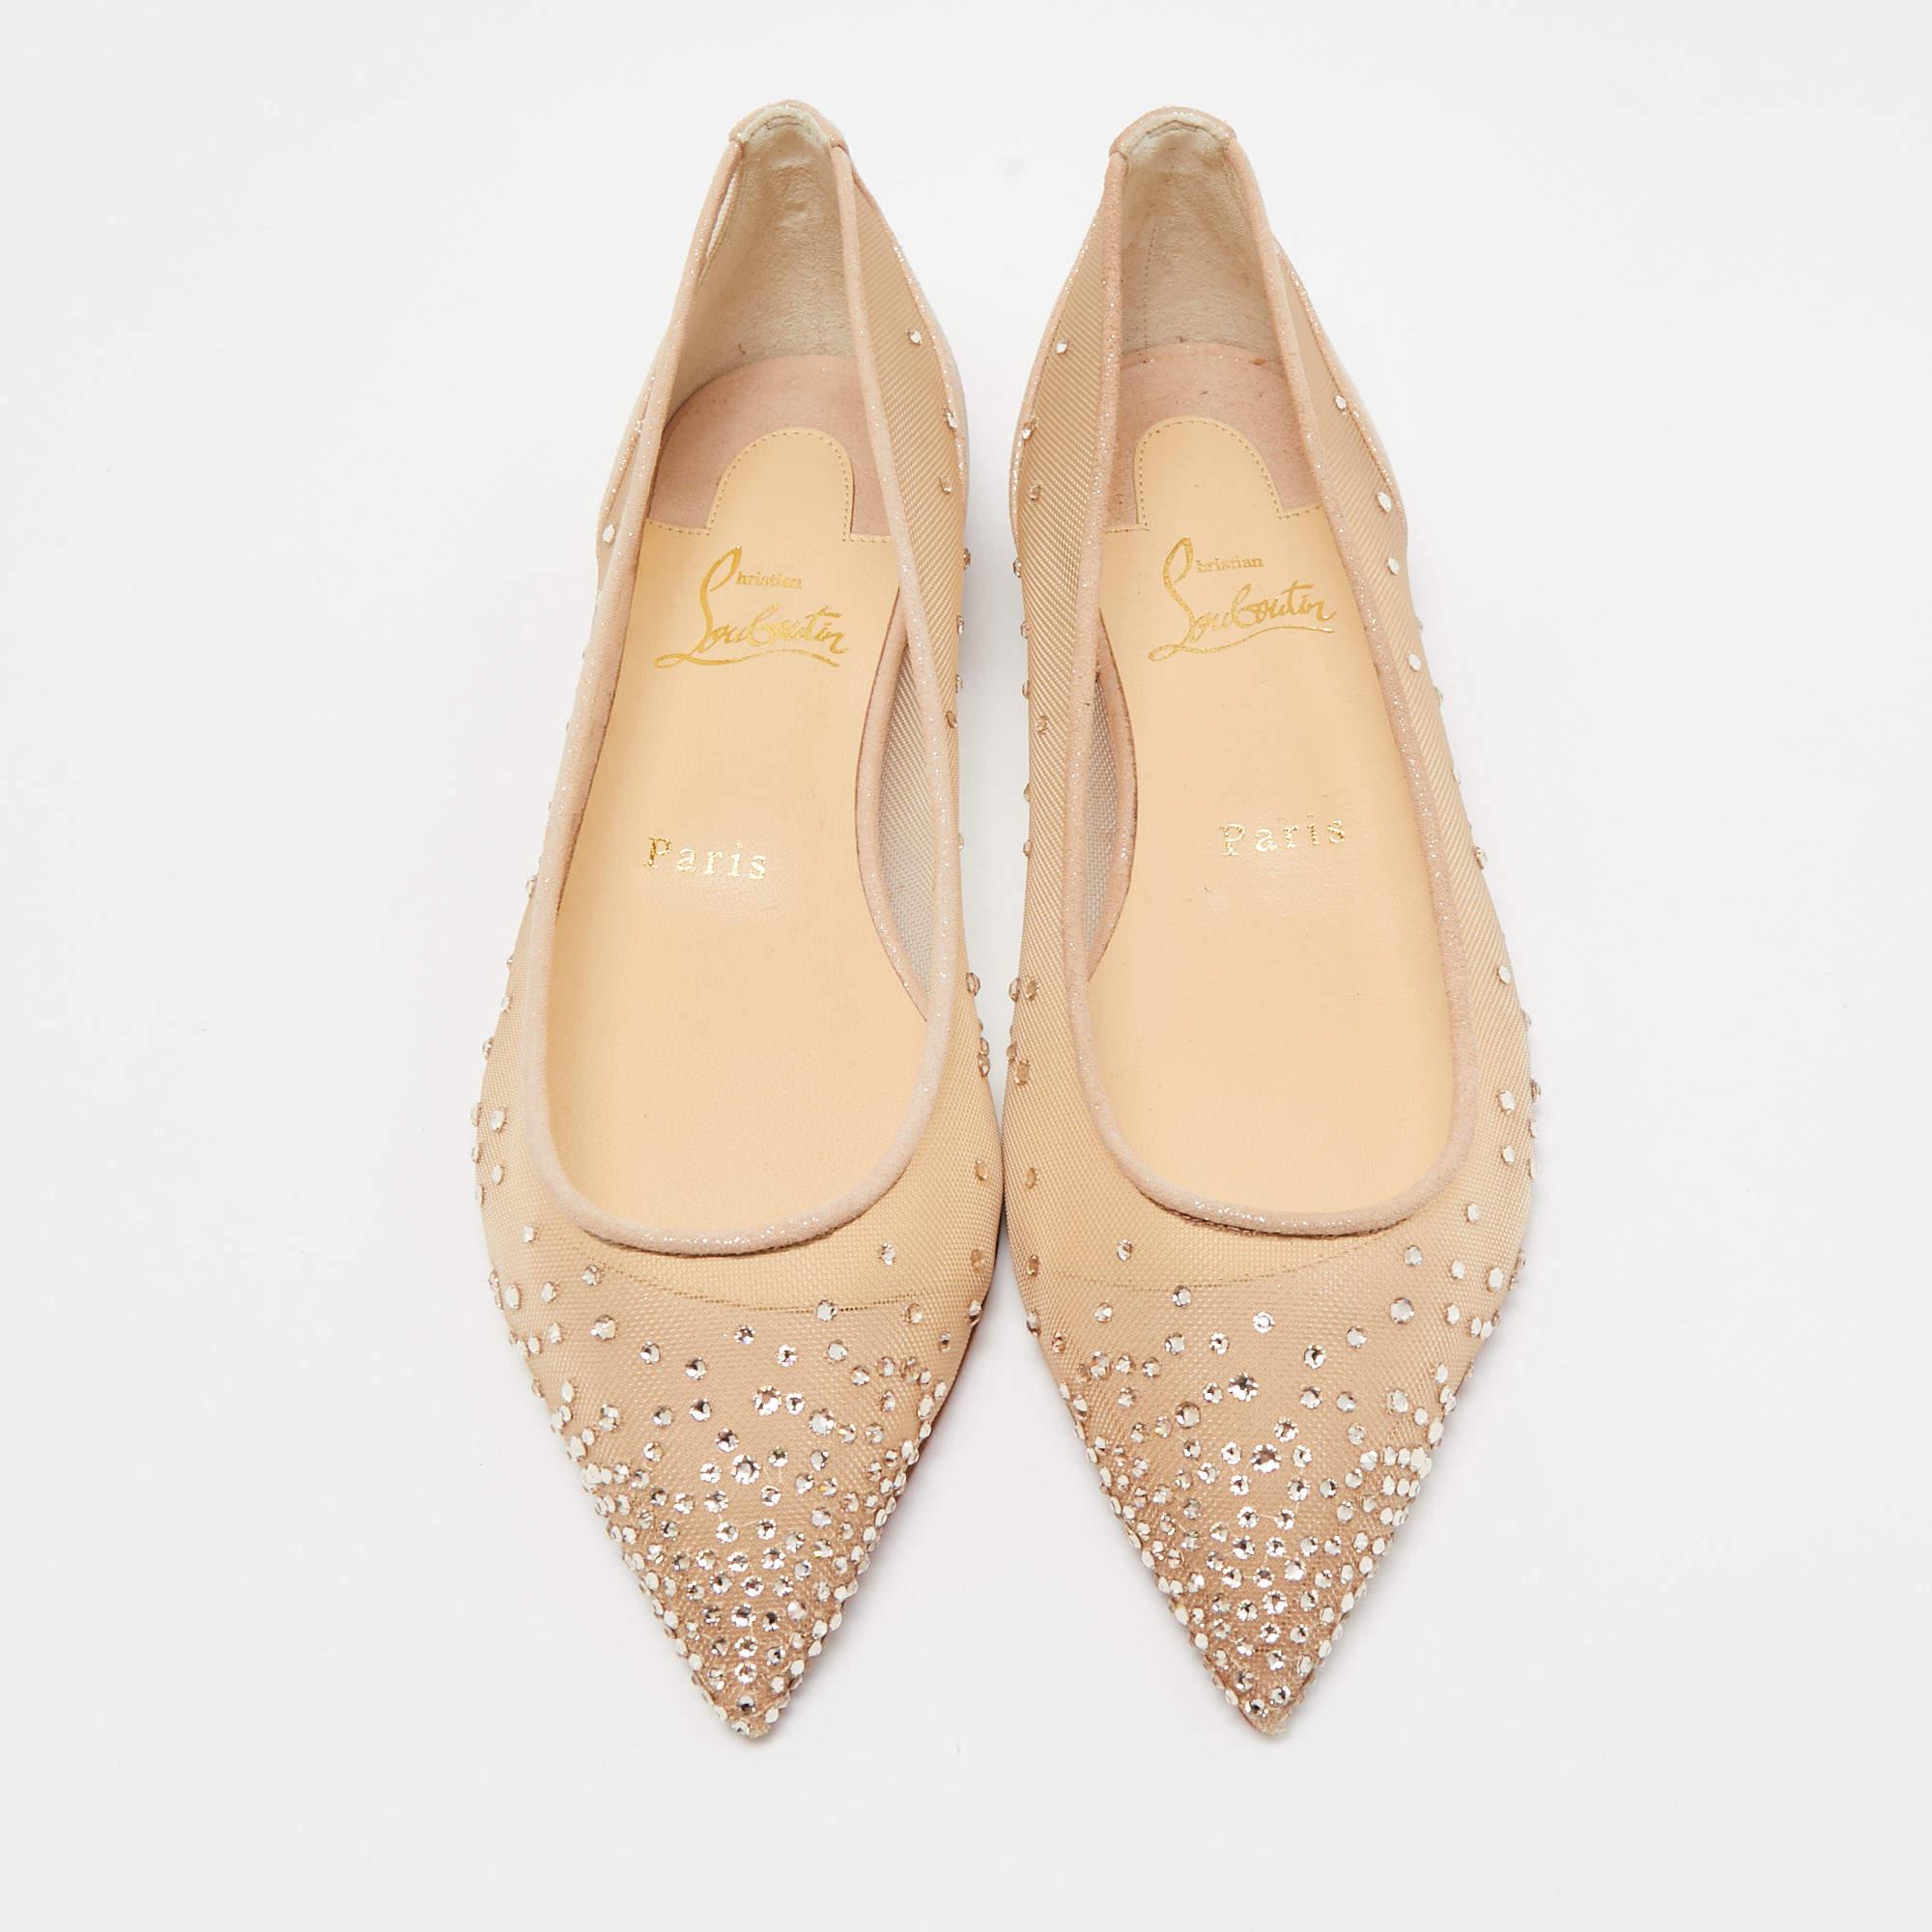 These embellished ballet flats from Christian Louboutin have been designed to lift your style. They are crafted from mesh as well as suede and are designed to hold your feet fashionably.

